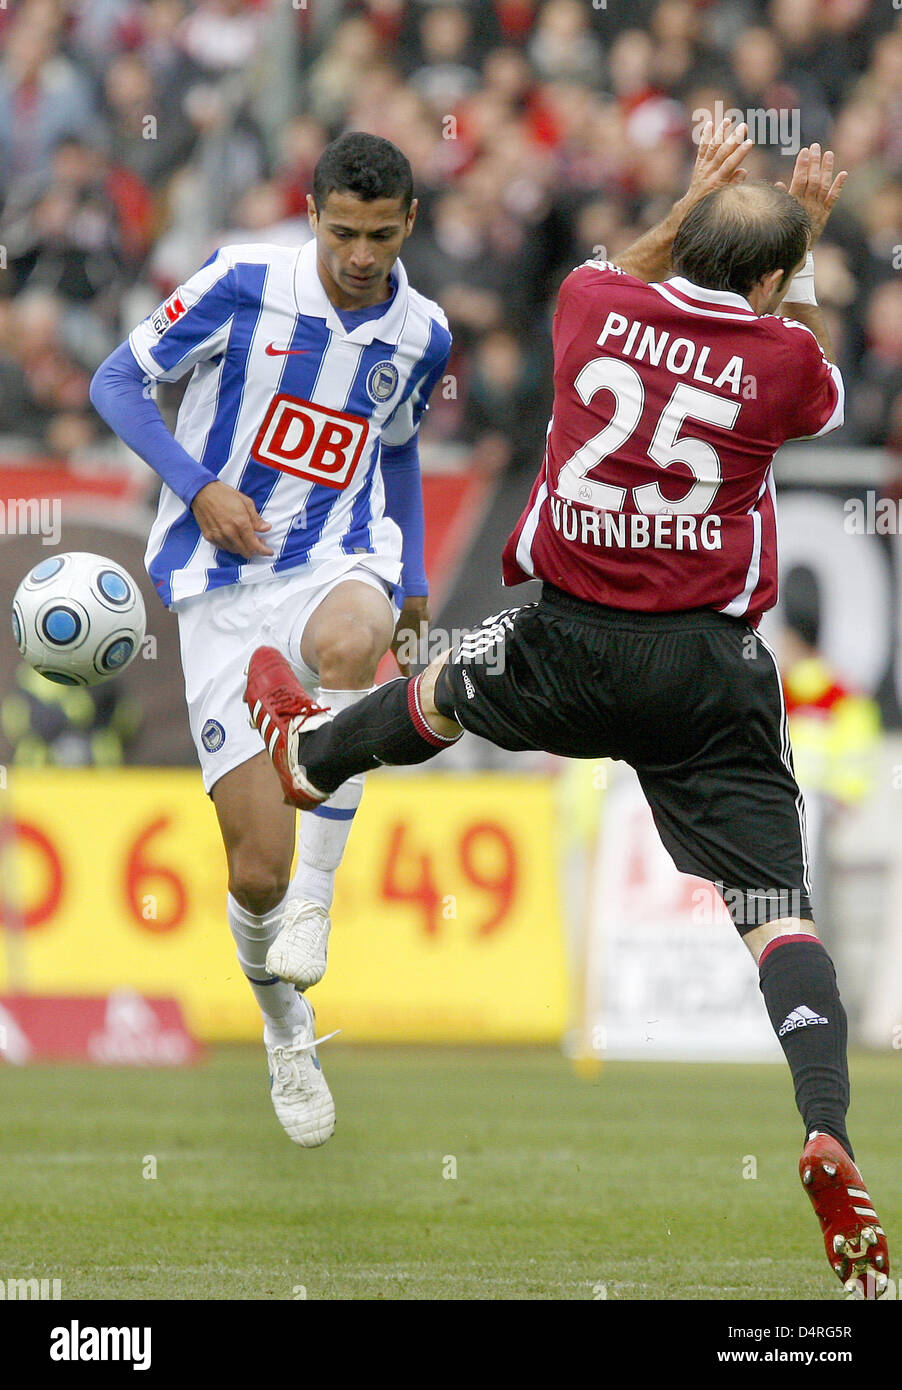 Nuremberg?s Javier Pinola (R) blocks a shot from Berlin?s Cicero (L) during the German Bundesliga match 1.FC Nuremberg v Hertha BSC Berlin at easyCredit stadium of Nuremberg, Germany, 17 October 2009. Nuremberg defeated Berlin by 3-0. Photo: DANIEL KARMANN  (ATTENTION: EMBARGO CONDITIONS! The DFL permits the further utilisation of the pictures in IPTV, mobile services and other new Stock Photo